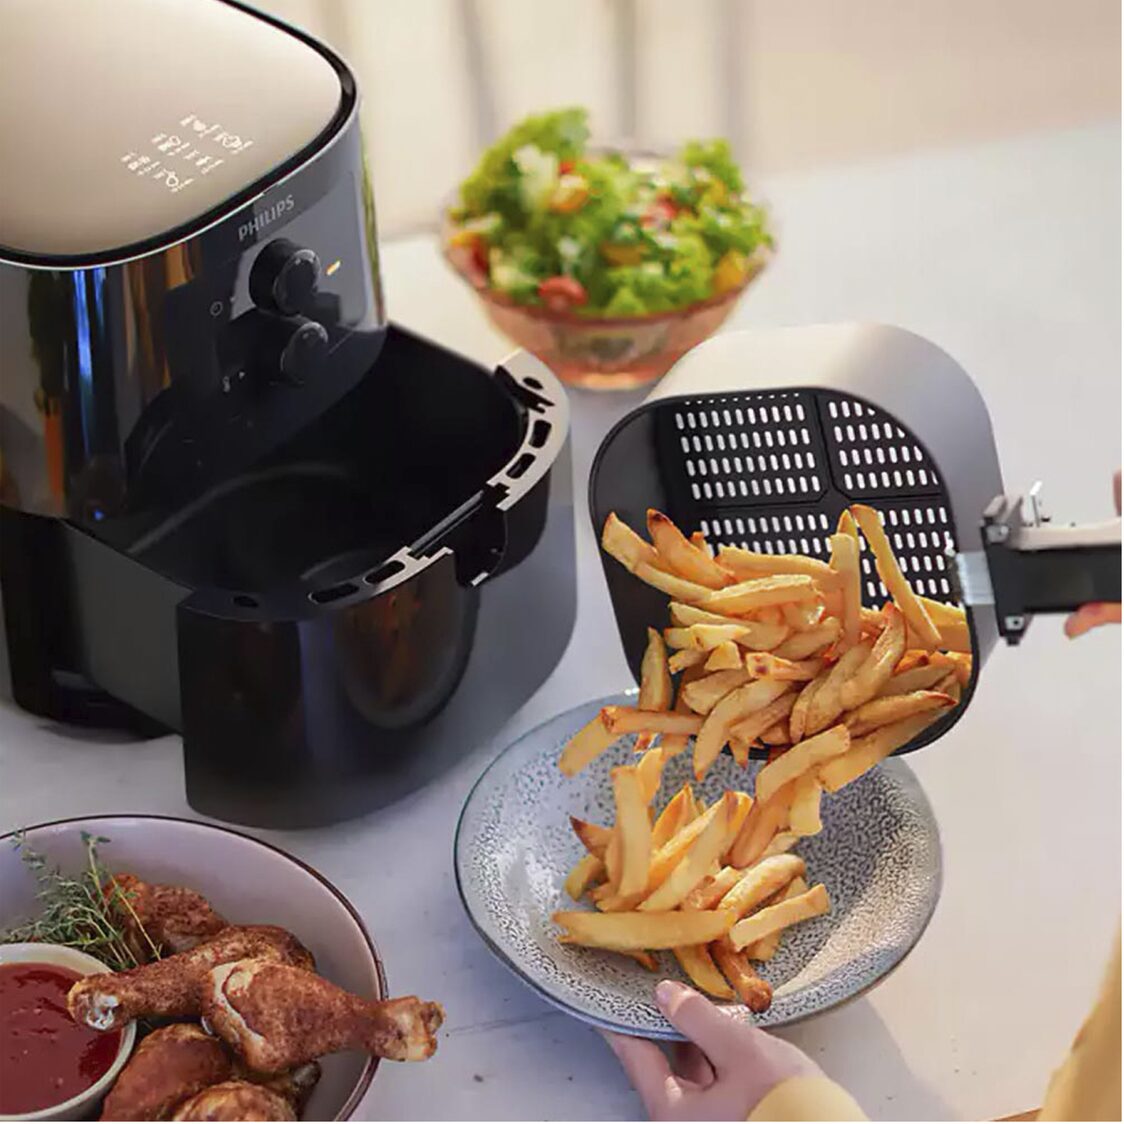 https://media.metro.sg/ProductImages/e19922d4-3bc2-4030-bb99-39388e01d183/6/std/philips-essential-air-fryer-with-rapid-air-technology-hd920091-230815112156.jpg